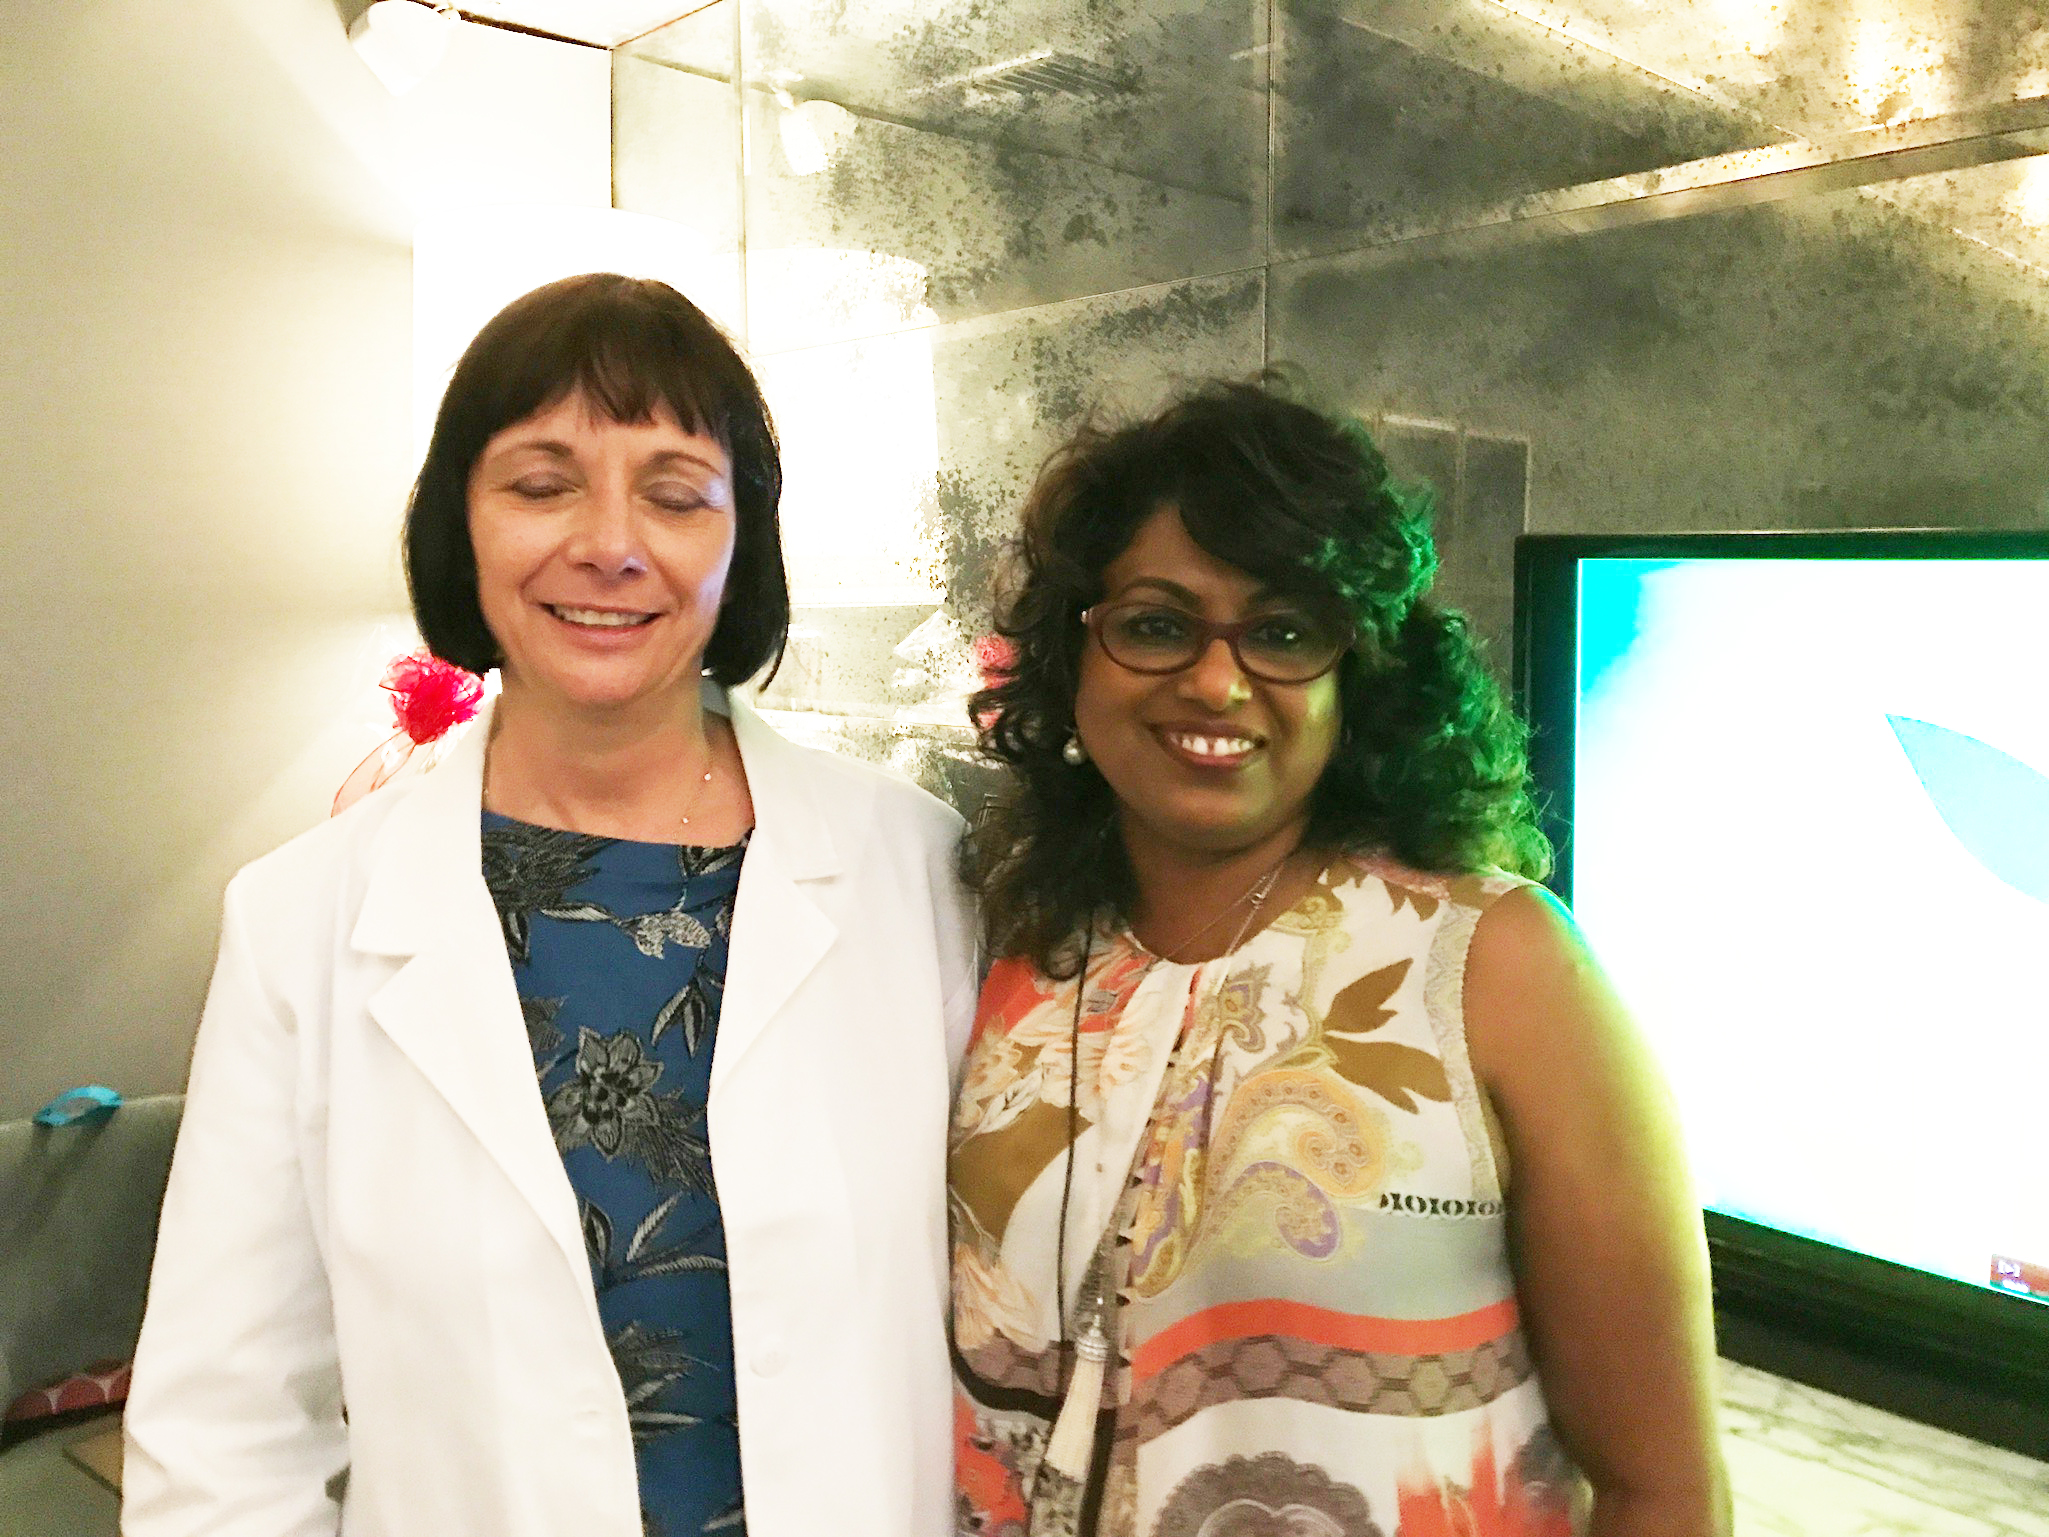 NHV Natural Pet product's founder Patra and Dr. Donna Raditic